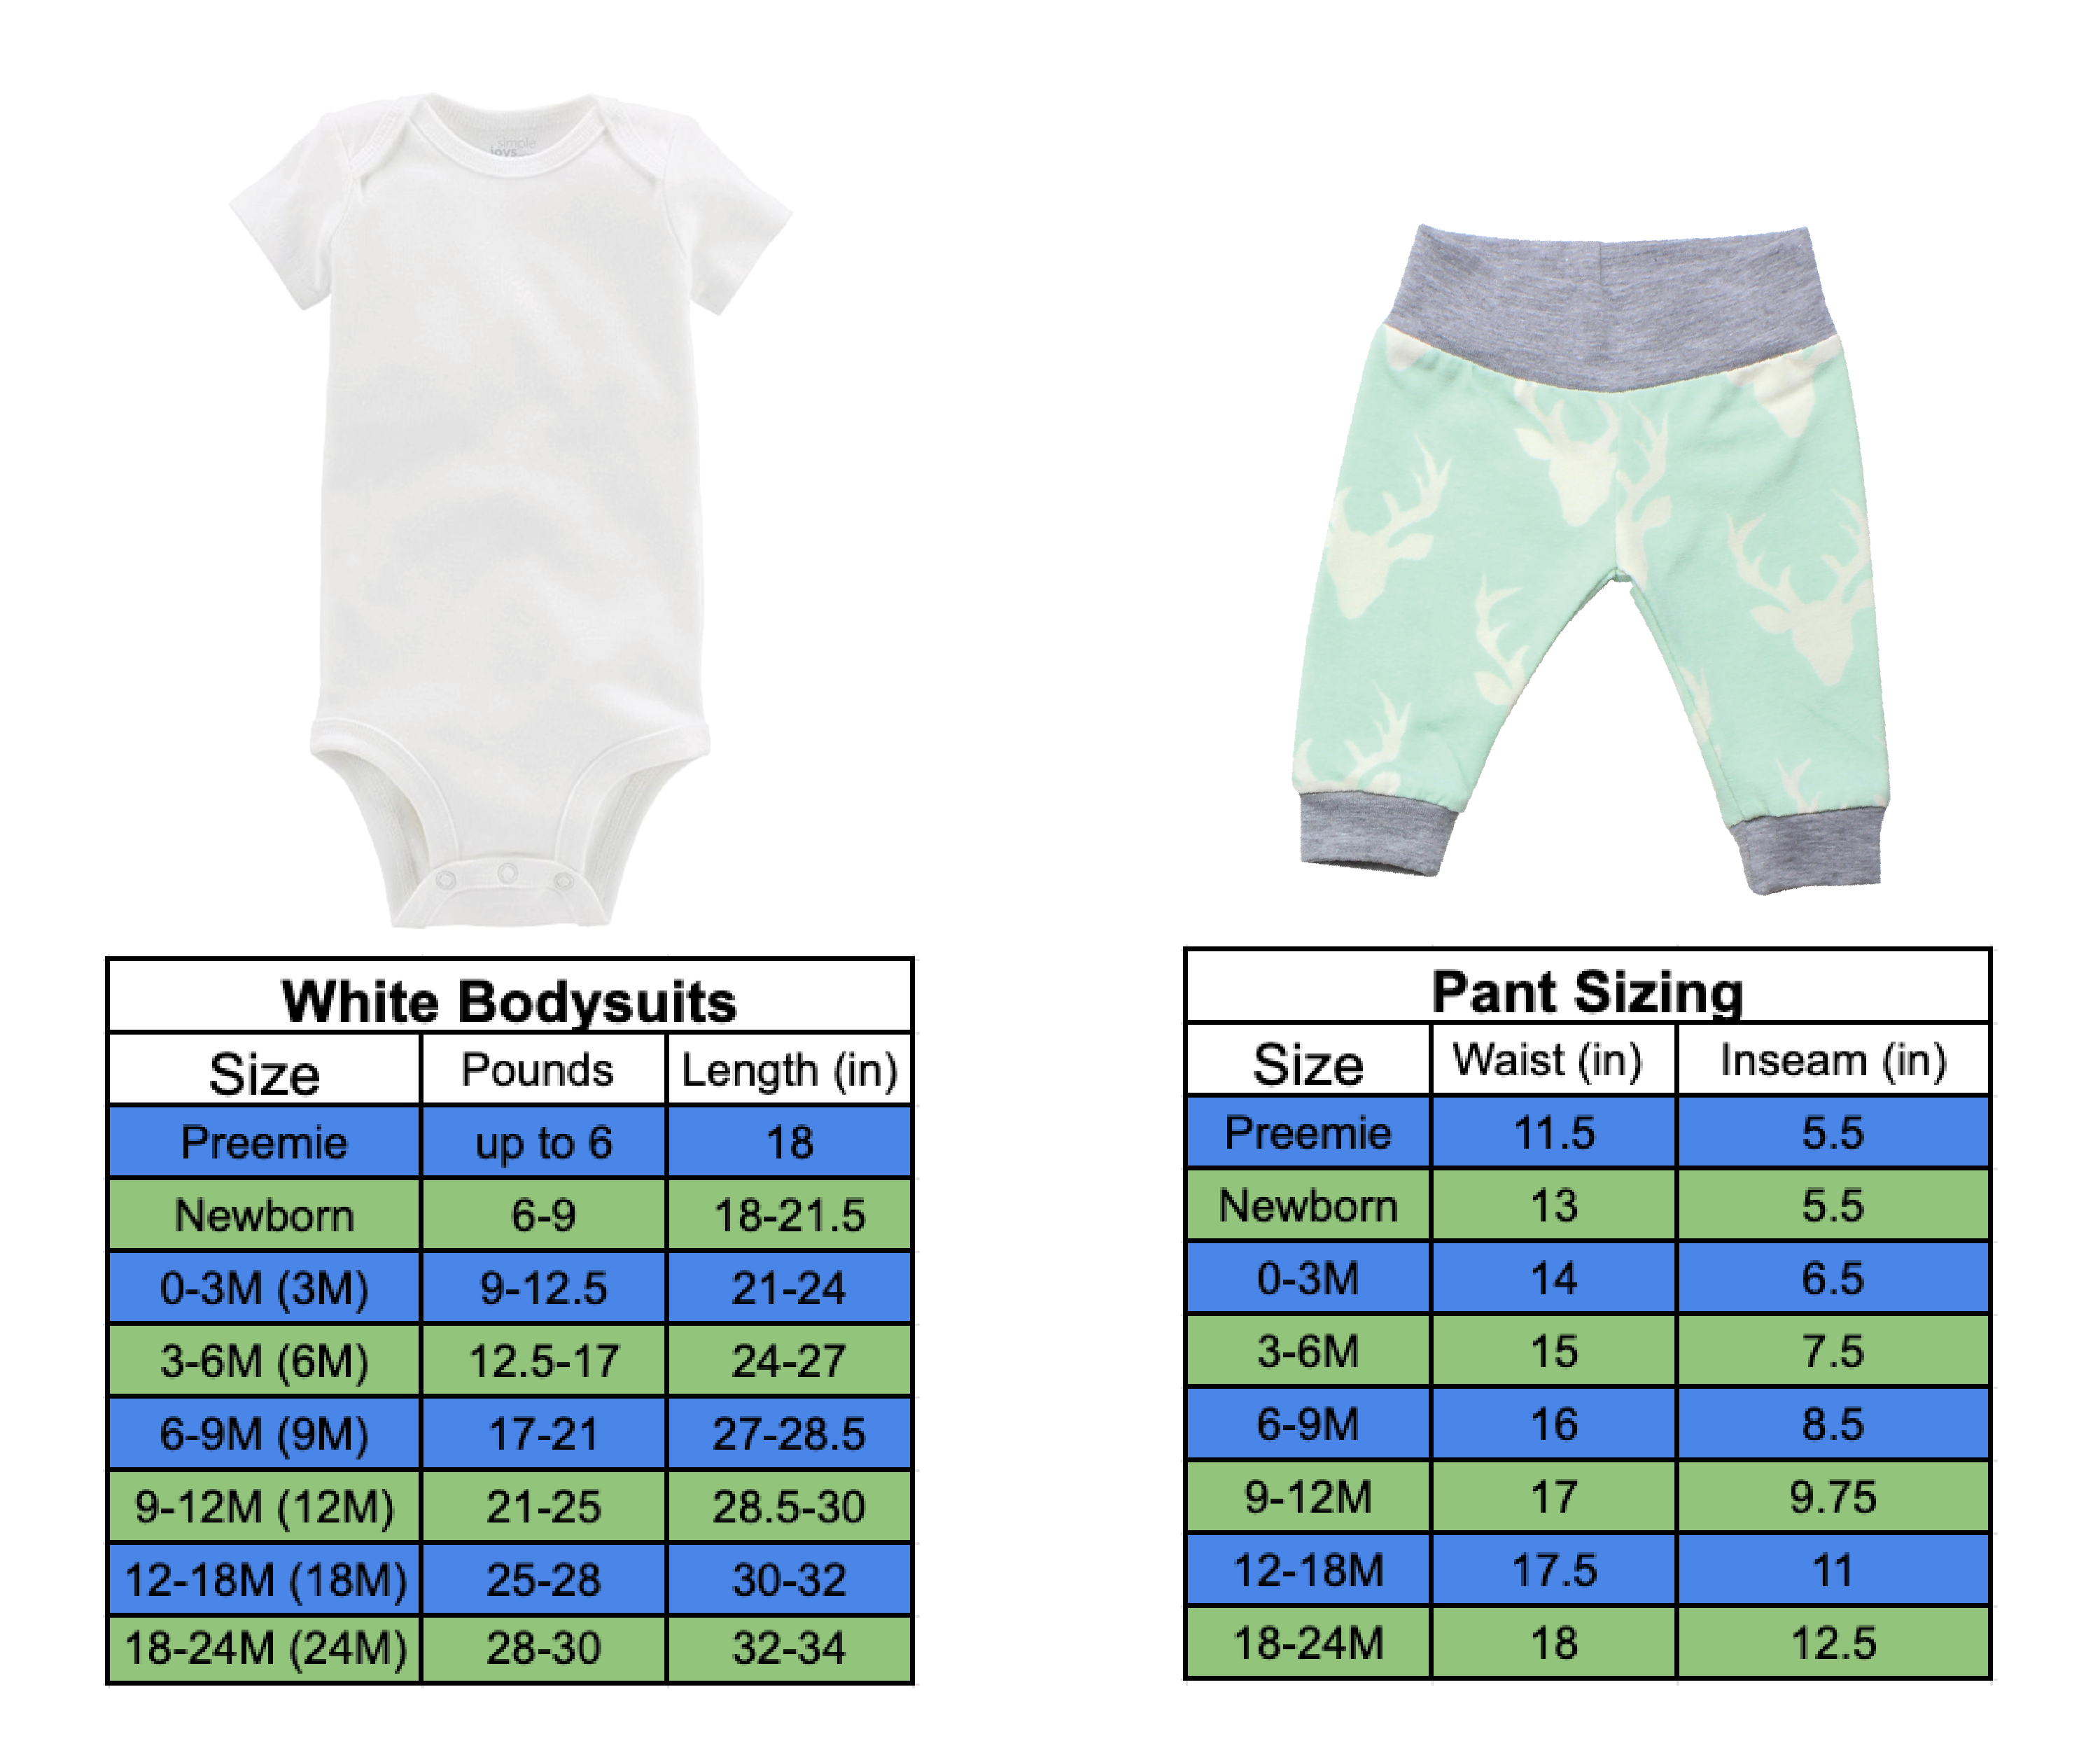 Mint Deer Unisex Baby Outfit